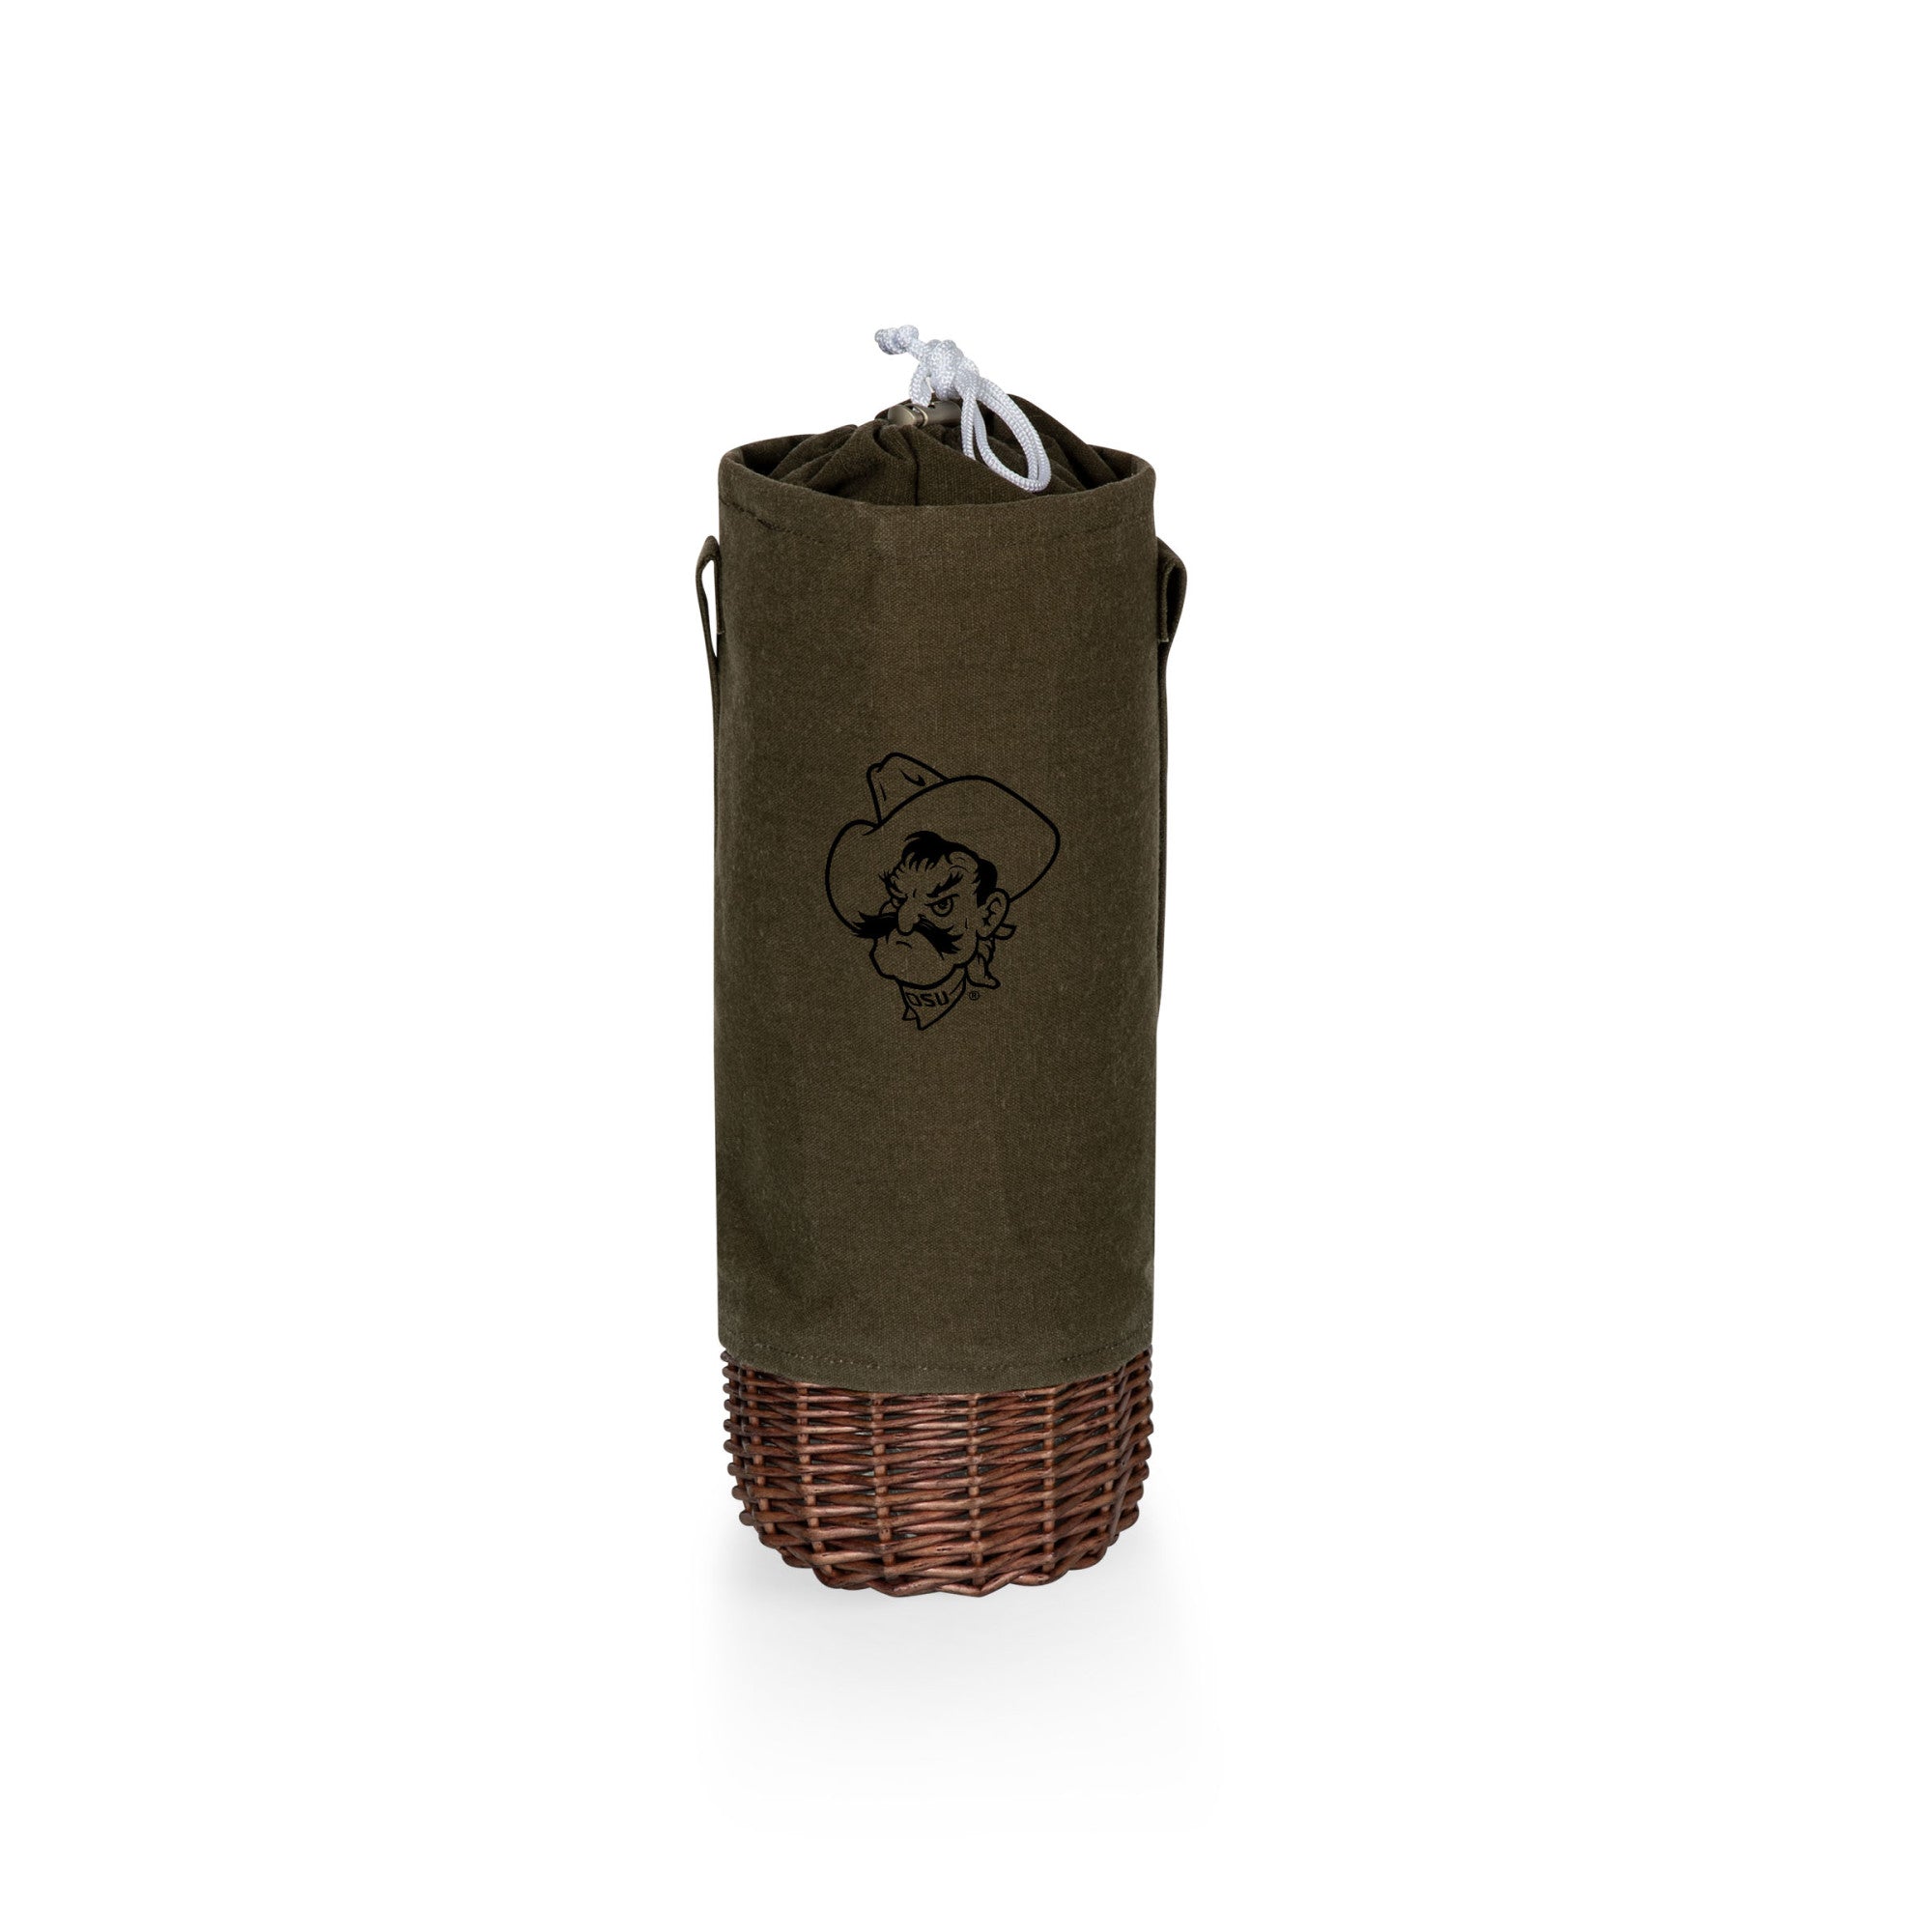 Oklahoma State Cowboys - Malbec Insulated Canvas and Willow Wine Bottle Basket